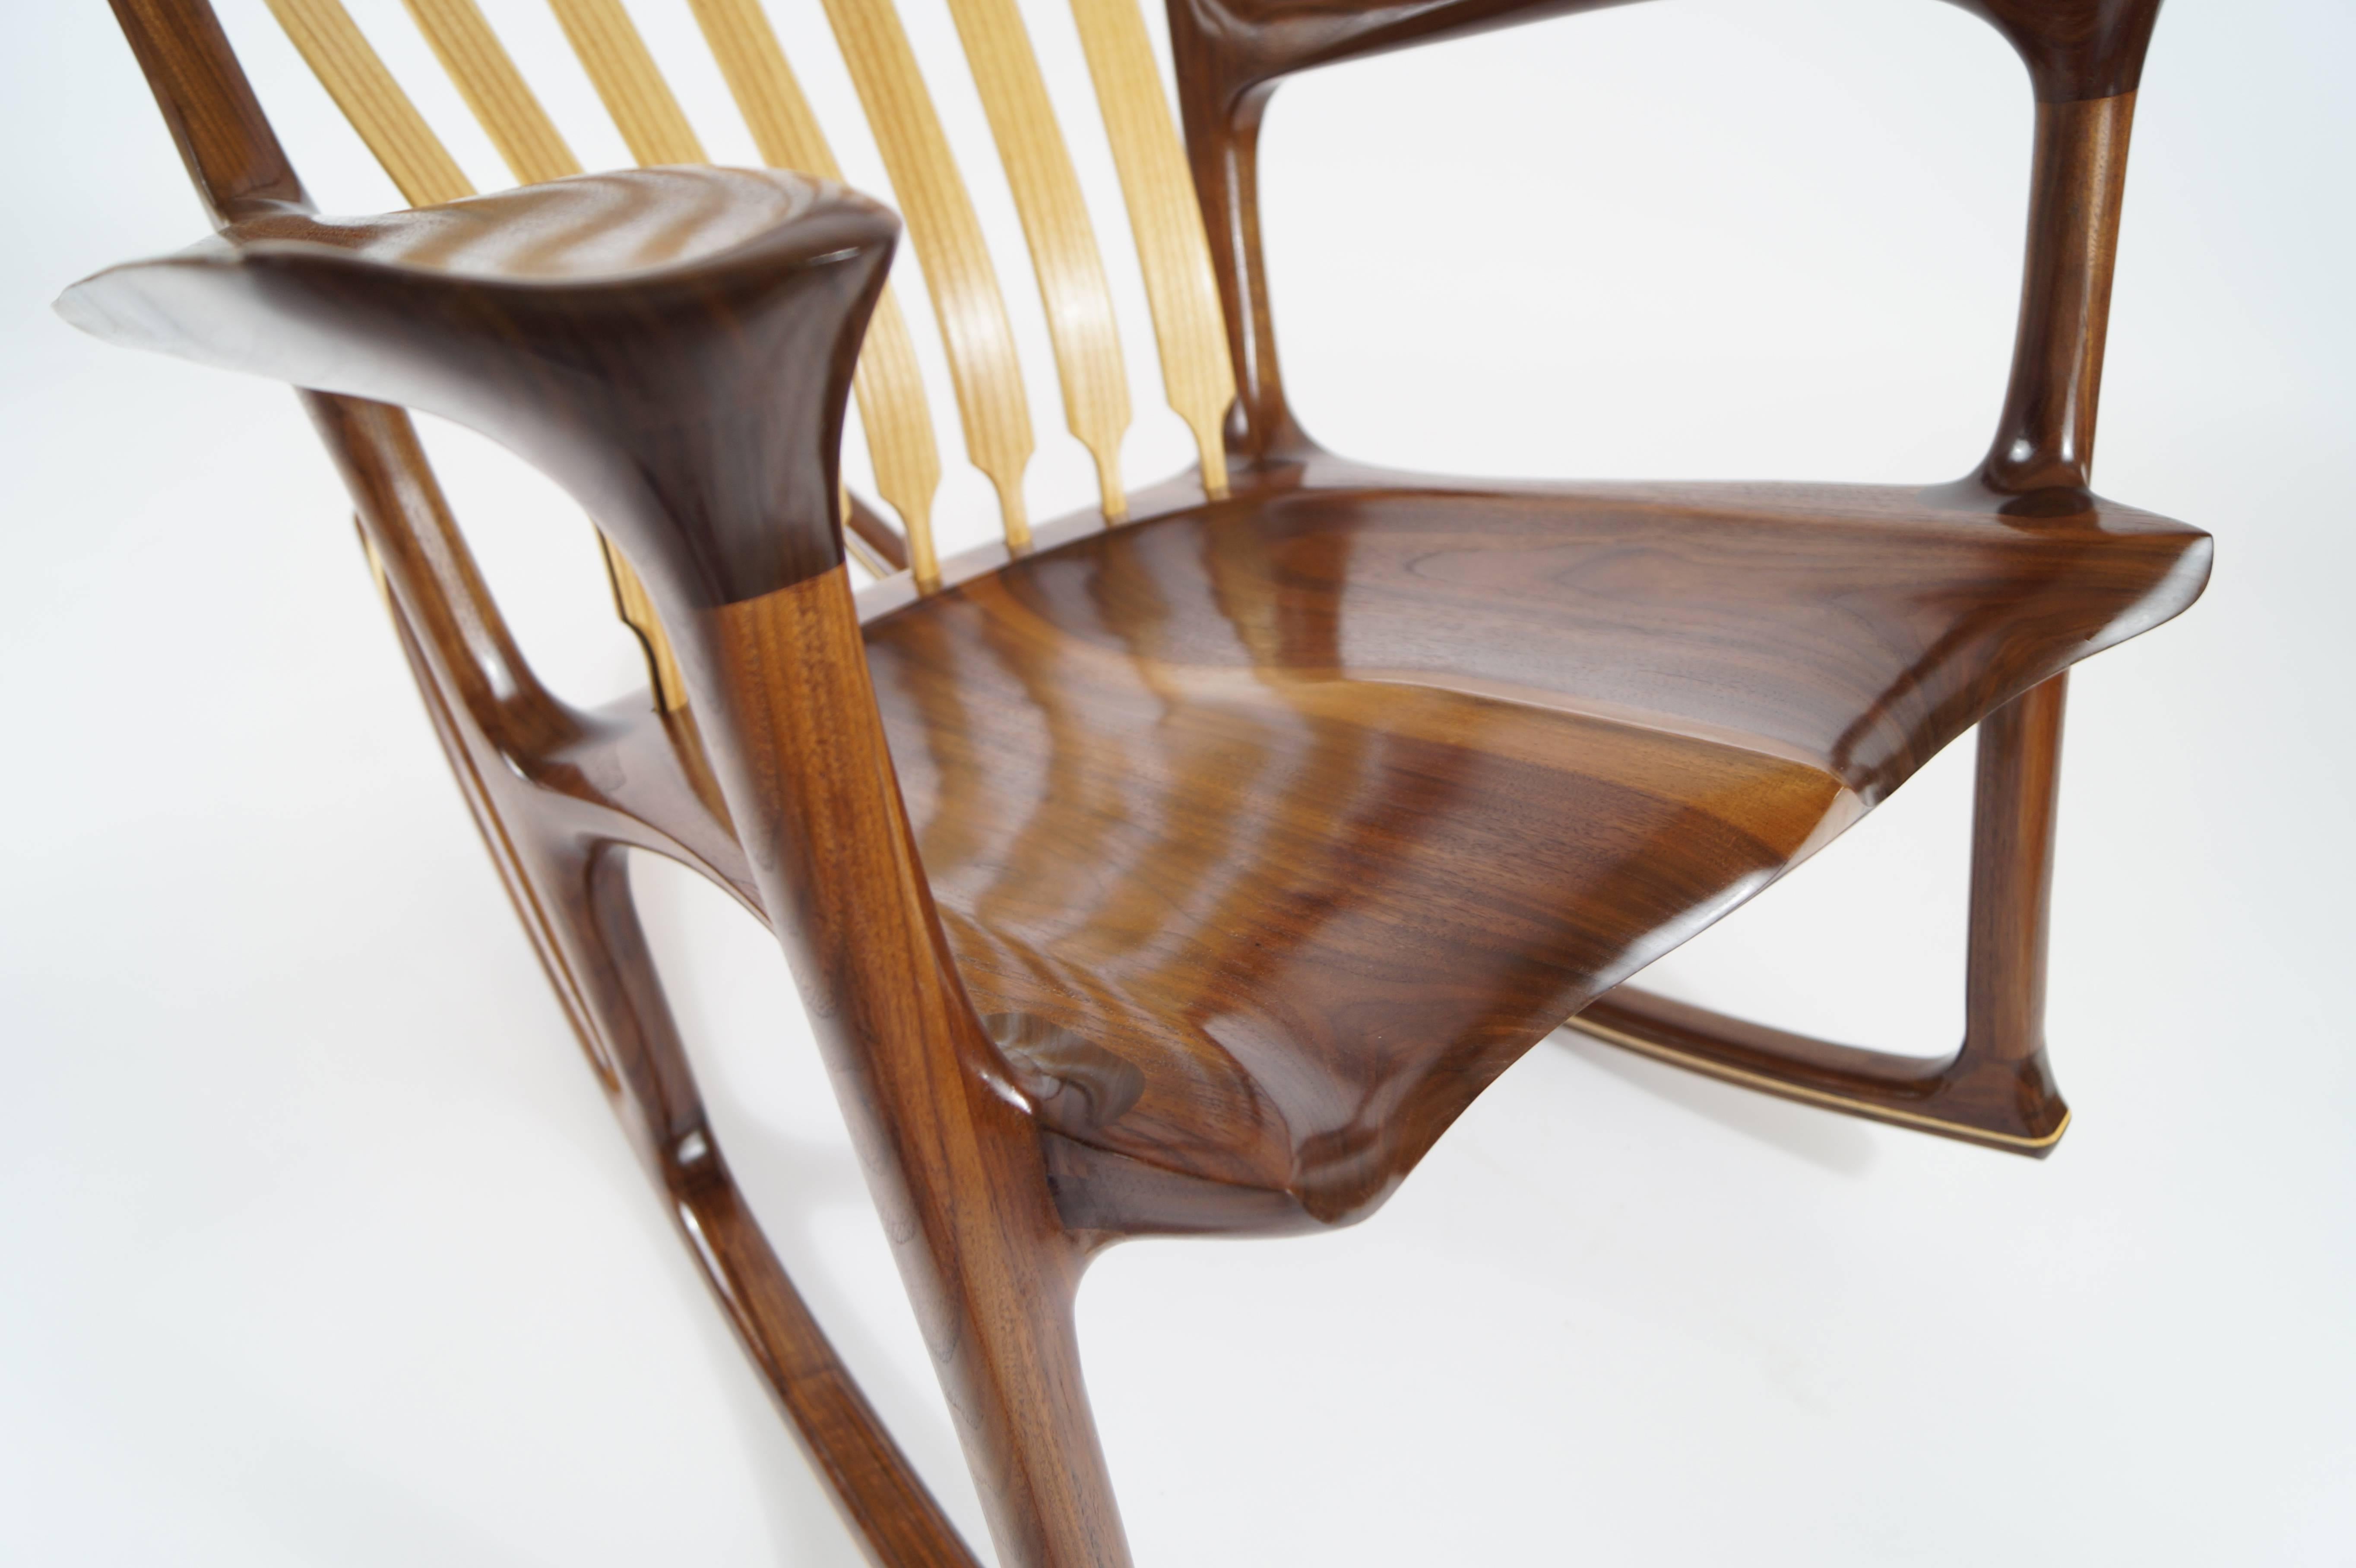 Rocking Chair, Handcrafted and Designed by Morten Stenbaek 1